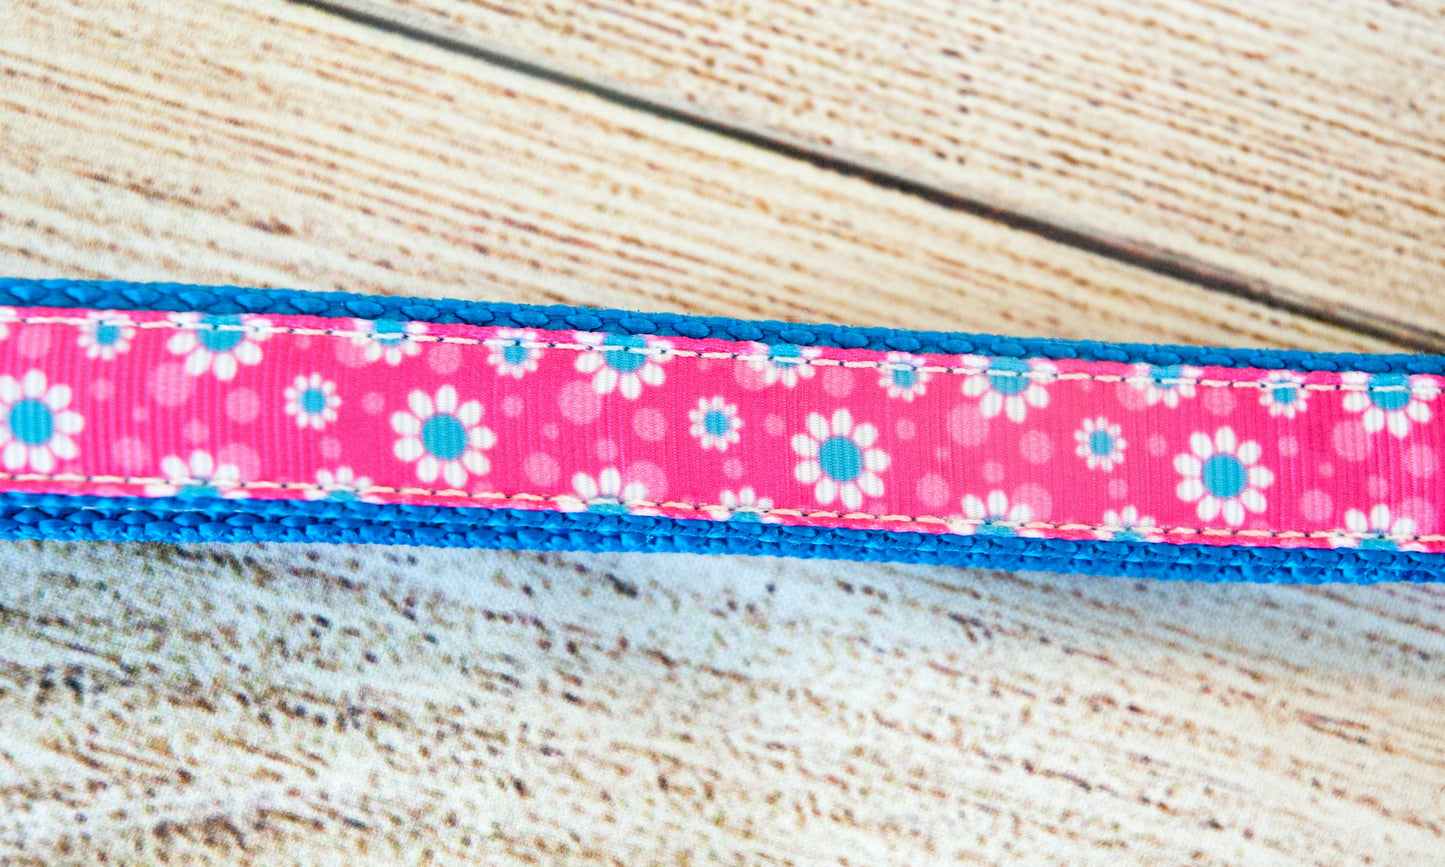 Daisy dog collar and/or leash with pink background 3/4" wide